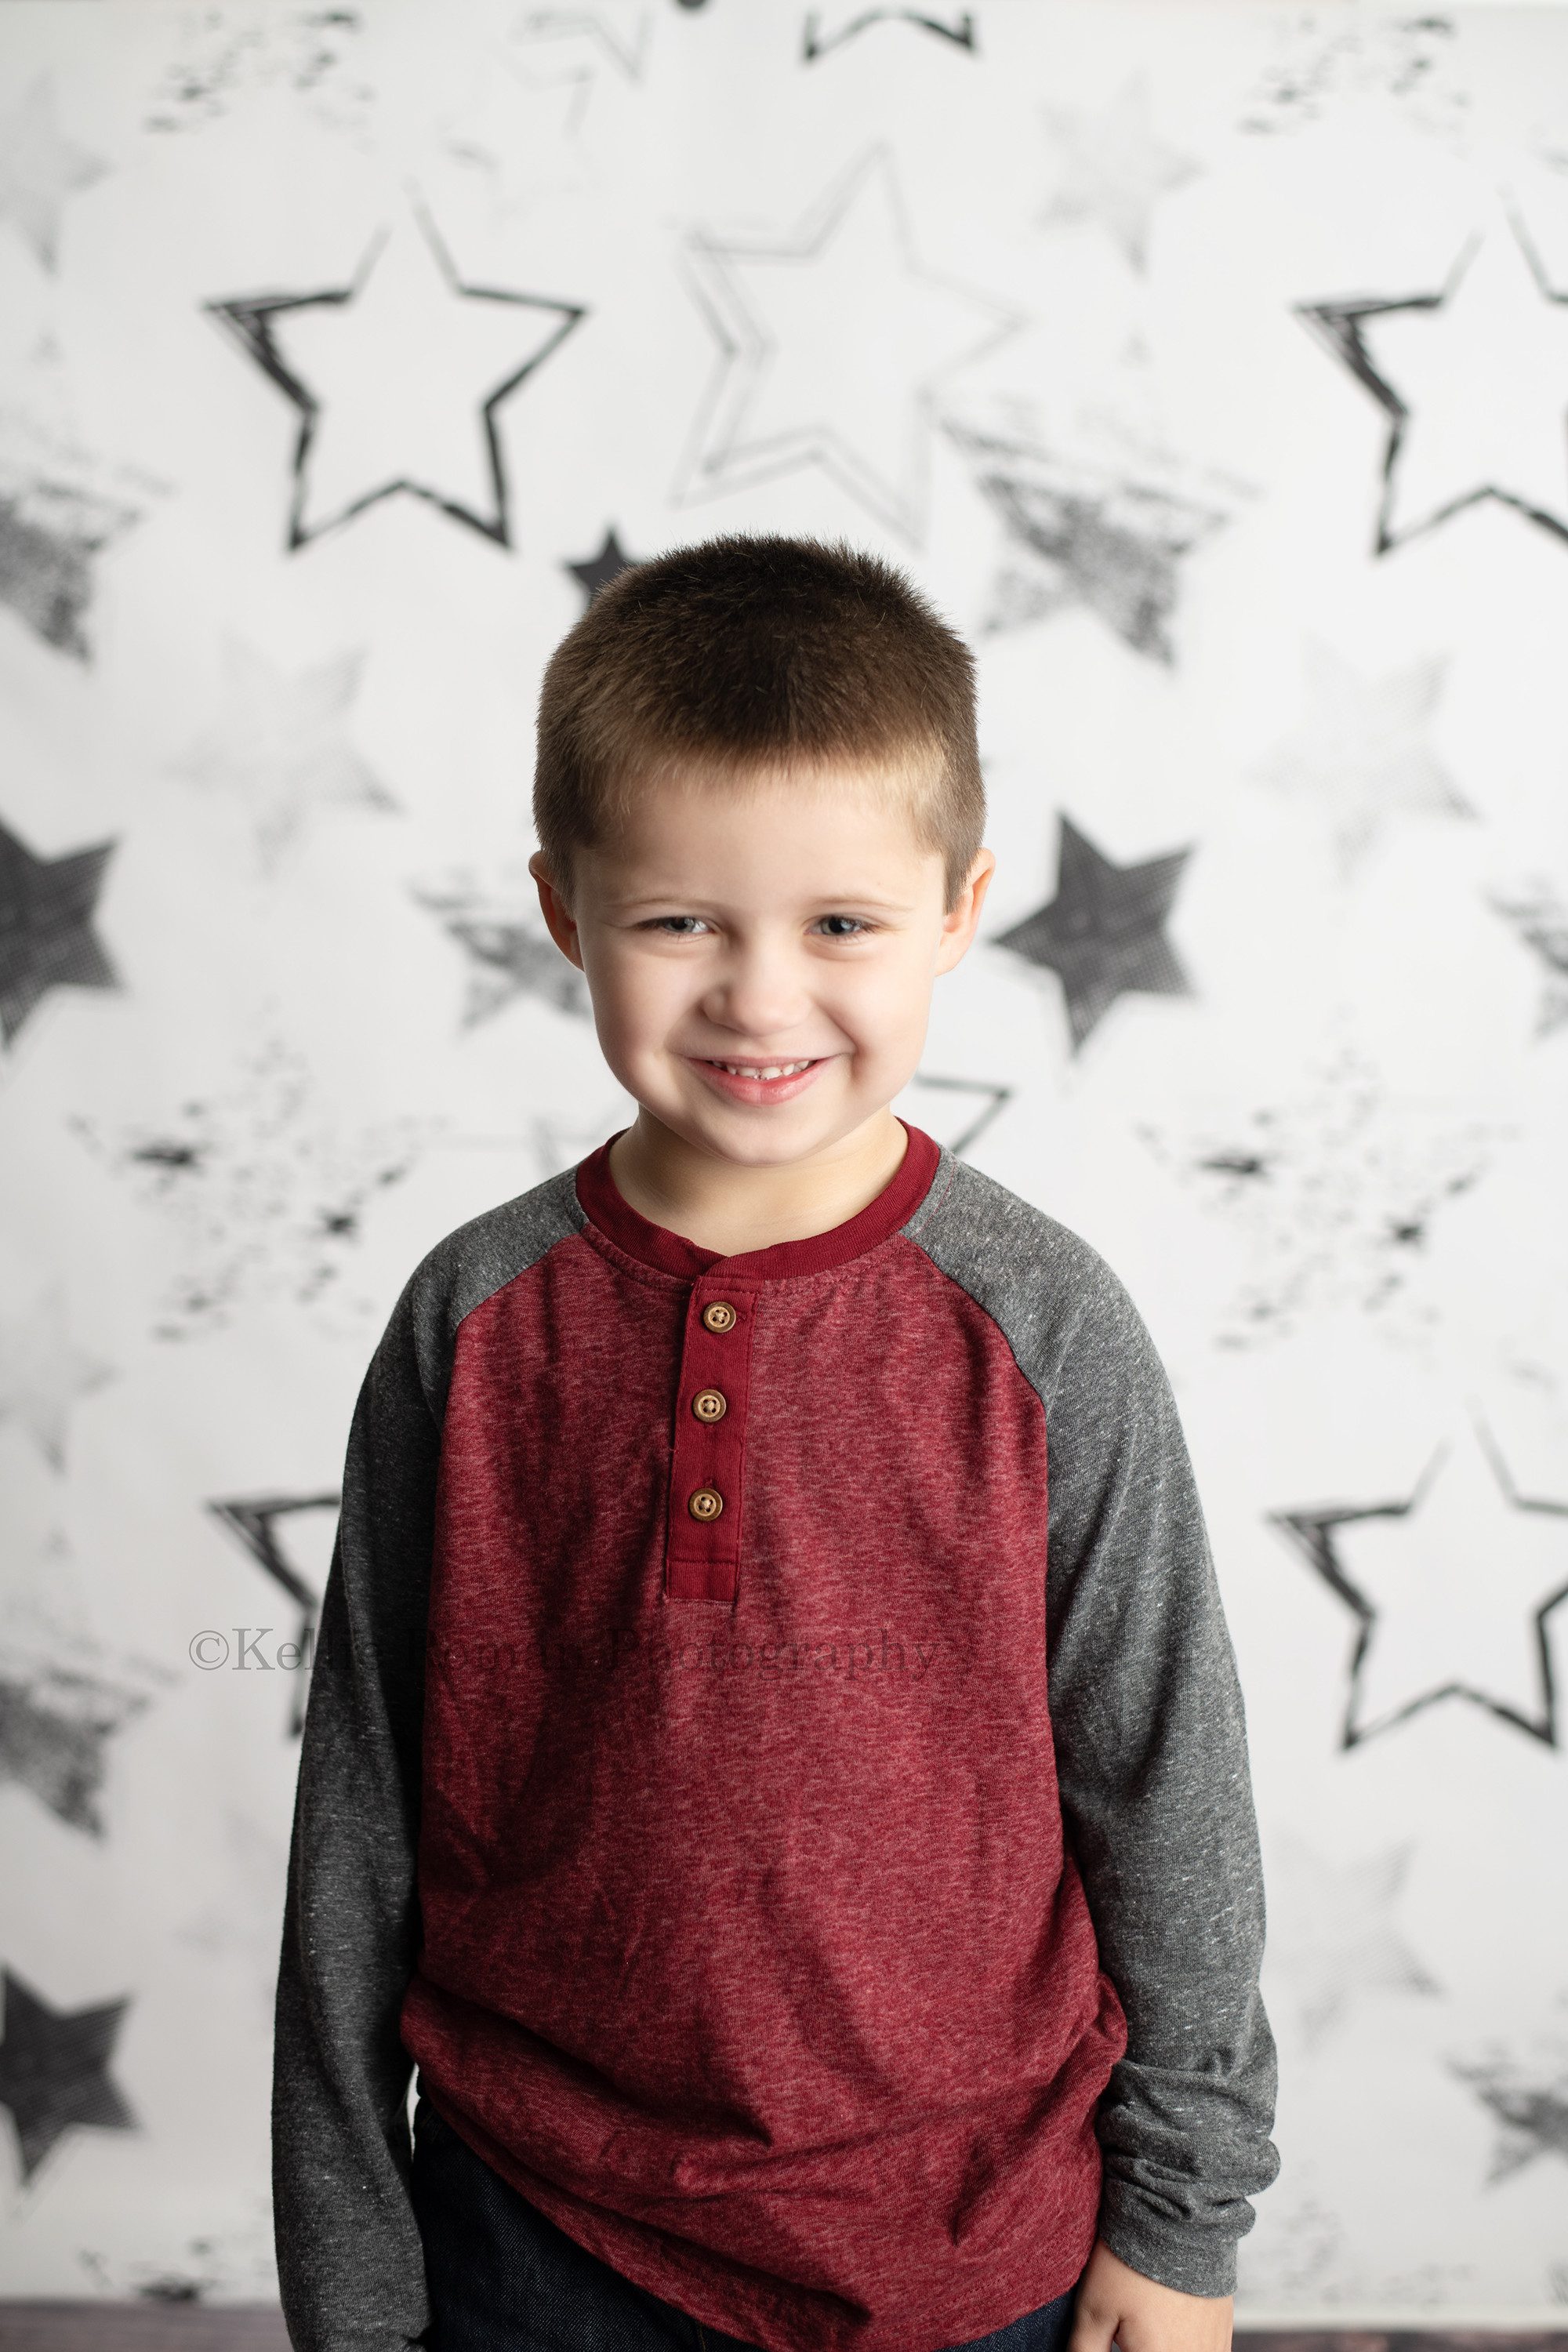 milwaukee milestone photographer a young boy celebrating his fourth birthday with photos is in milwaukee photographer studio he's in front of a white backdrop with black stars and is wearing a red and grey shirt